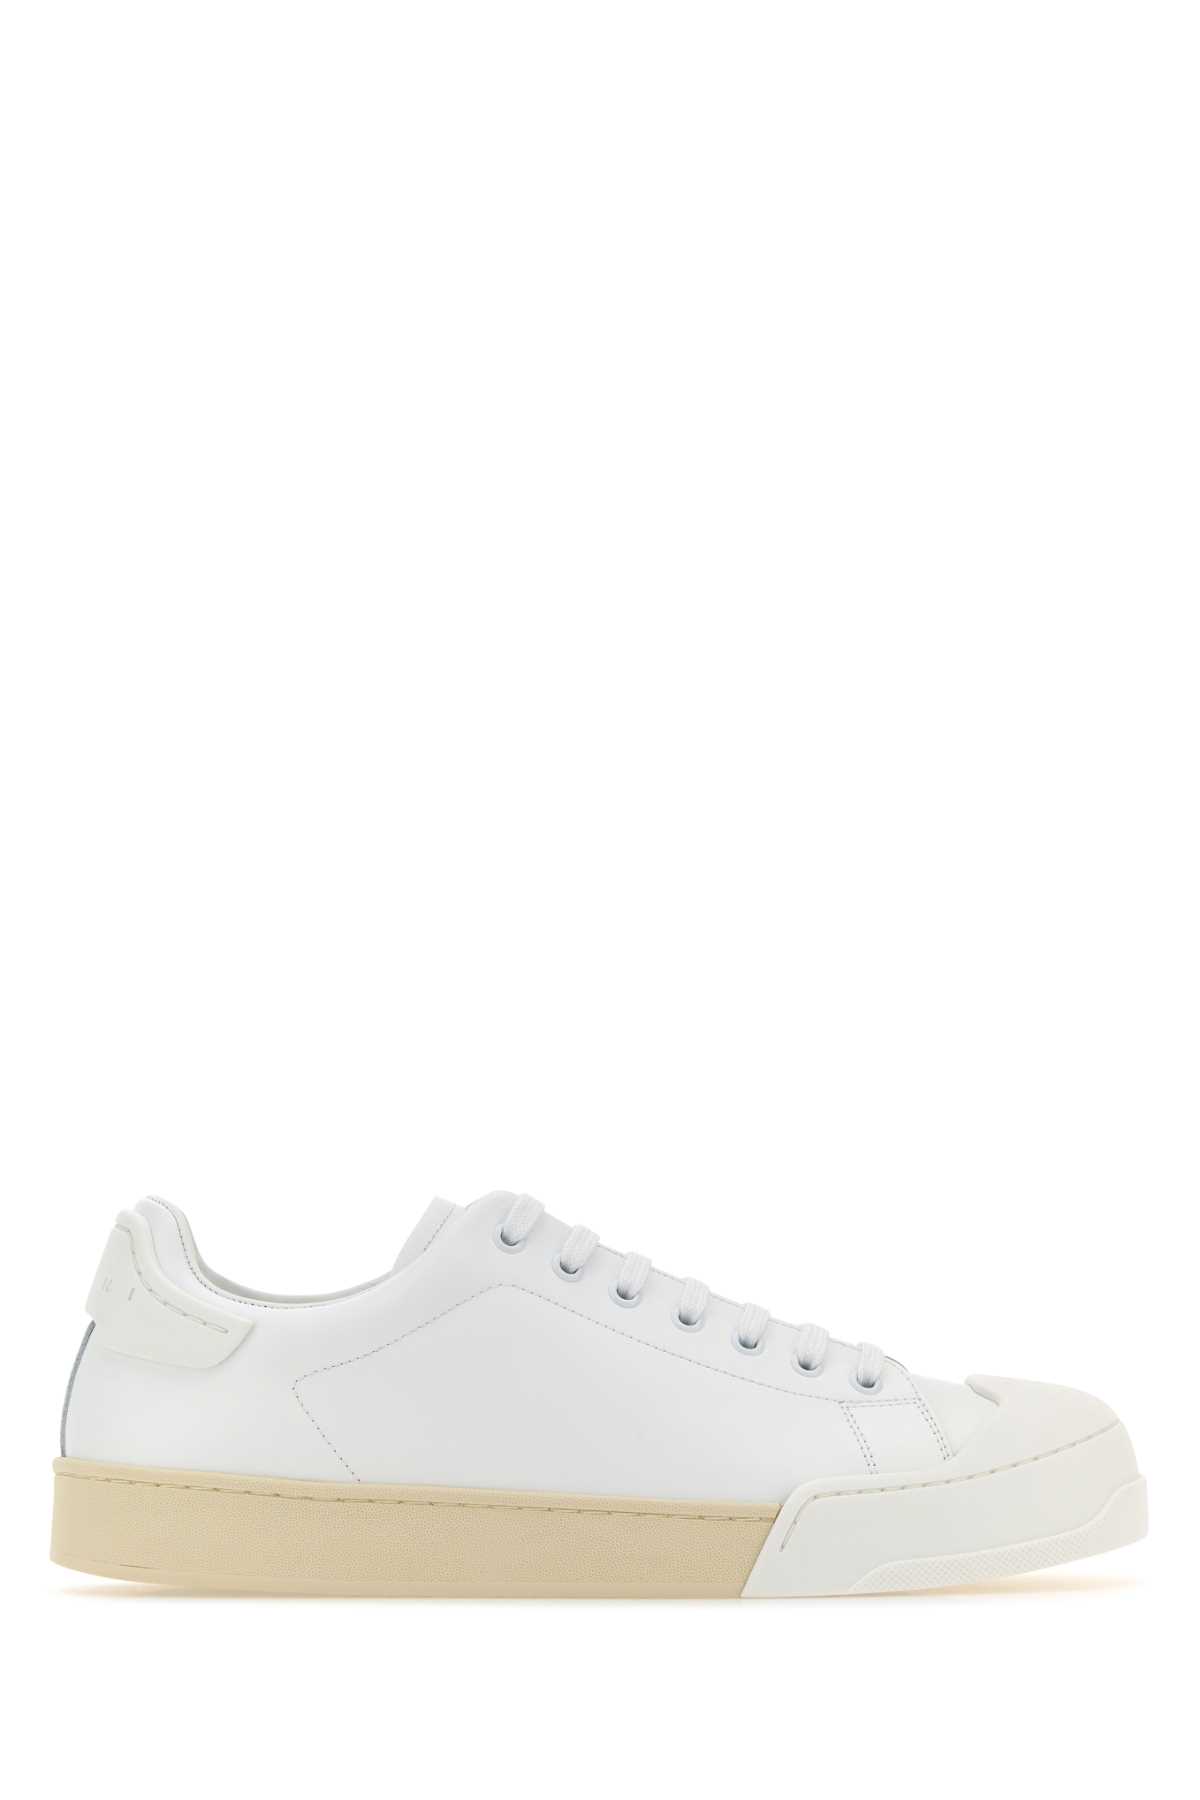 White Leather Dada Sneakers